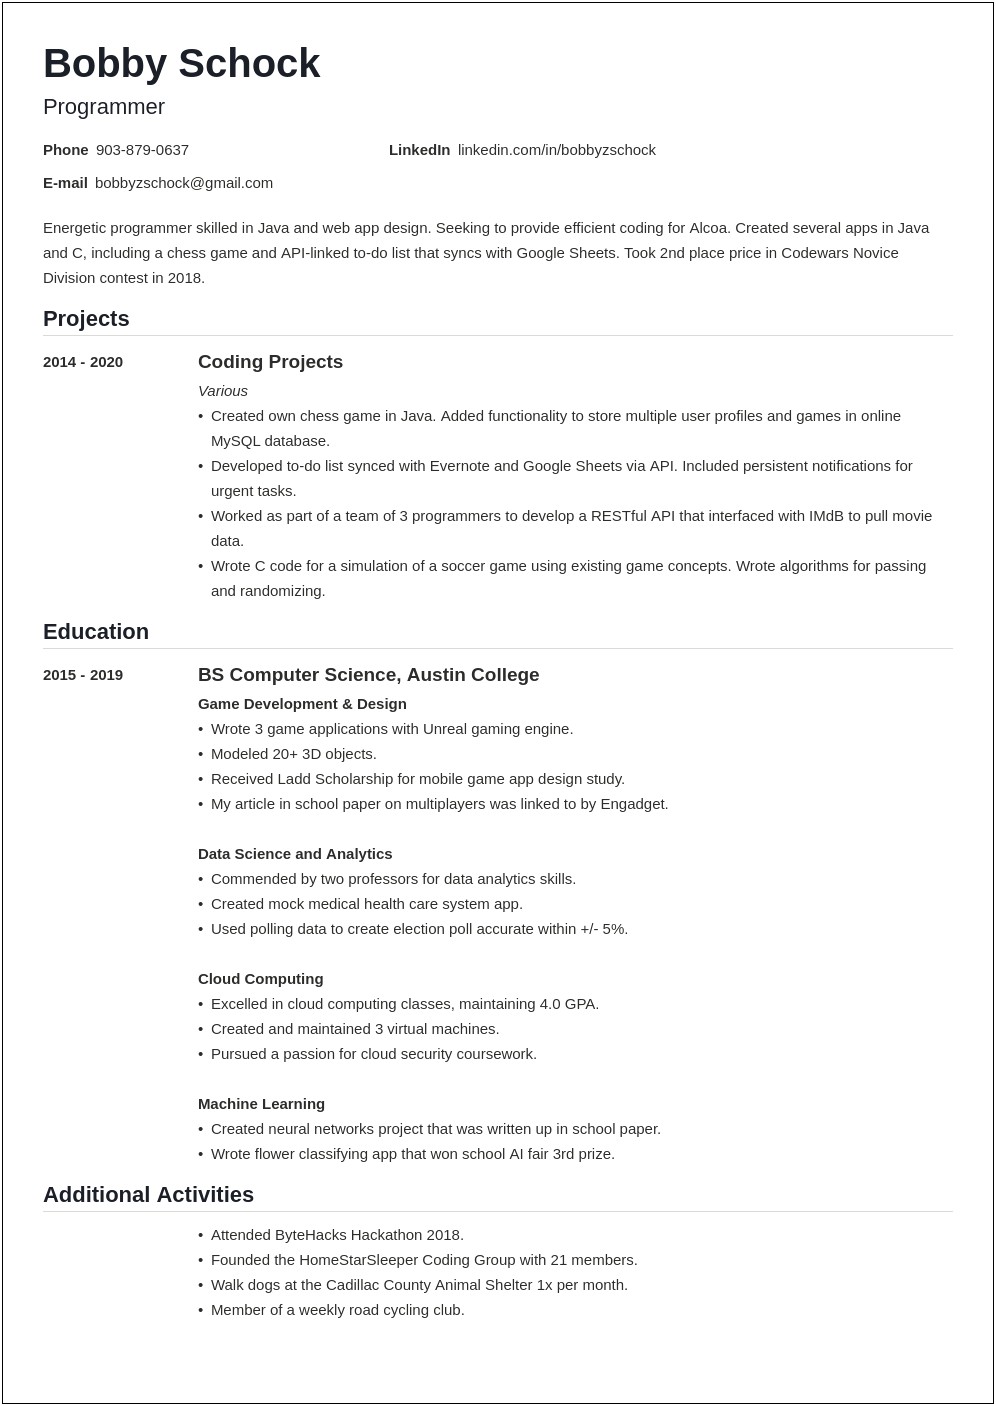 Resume Application For Unexperienced Teacher Example